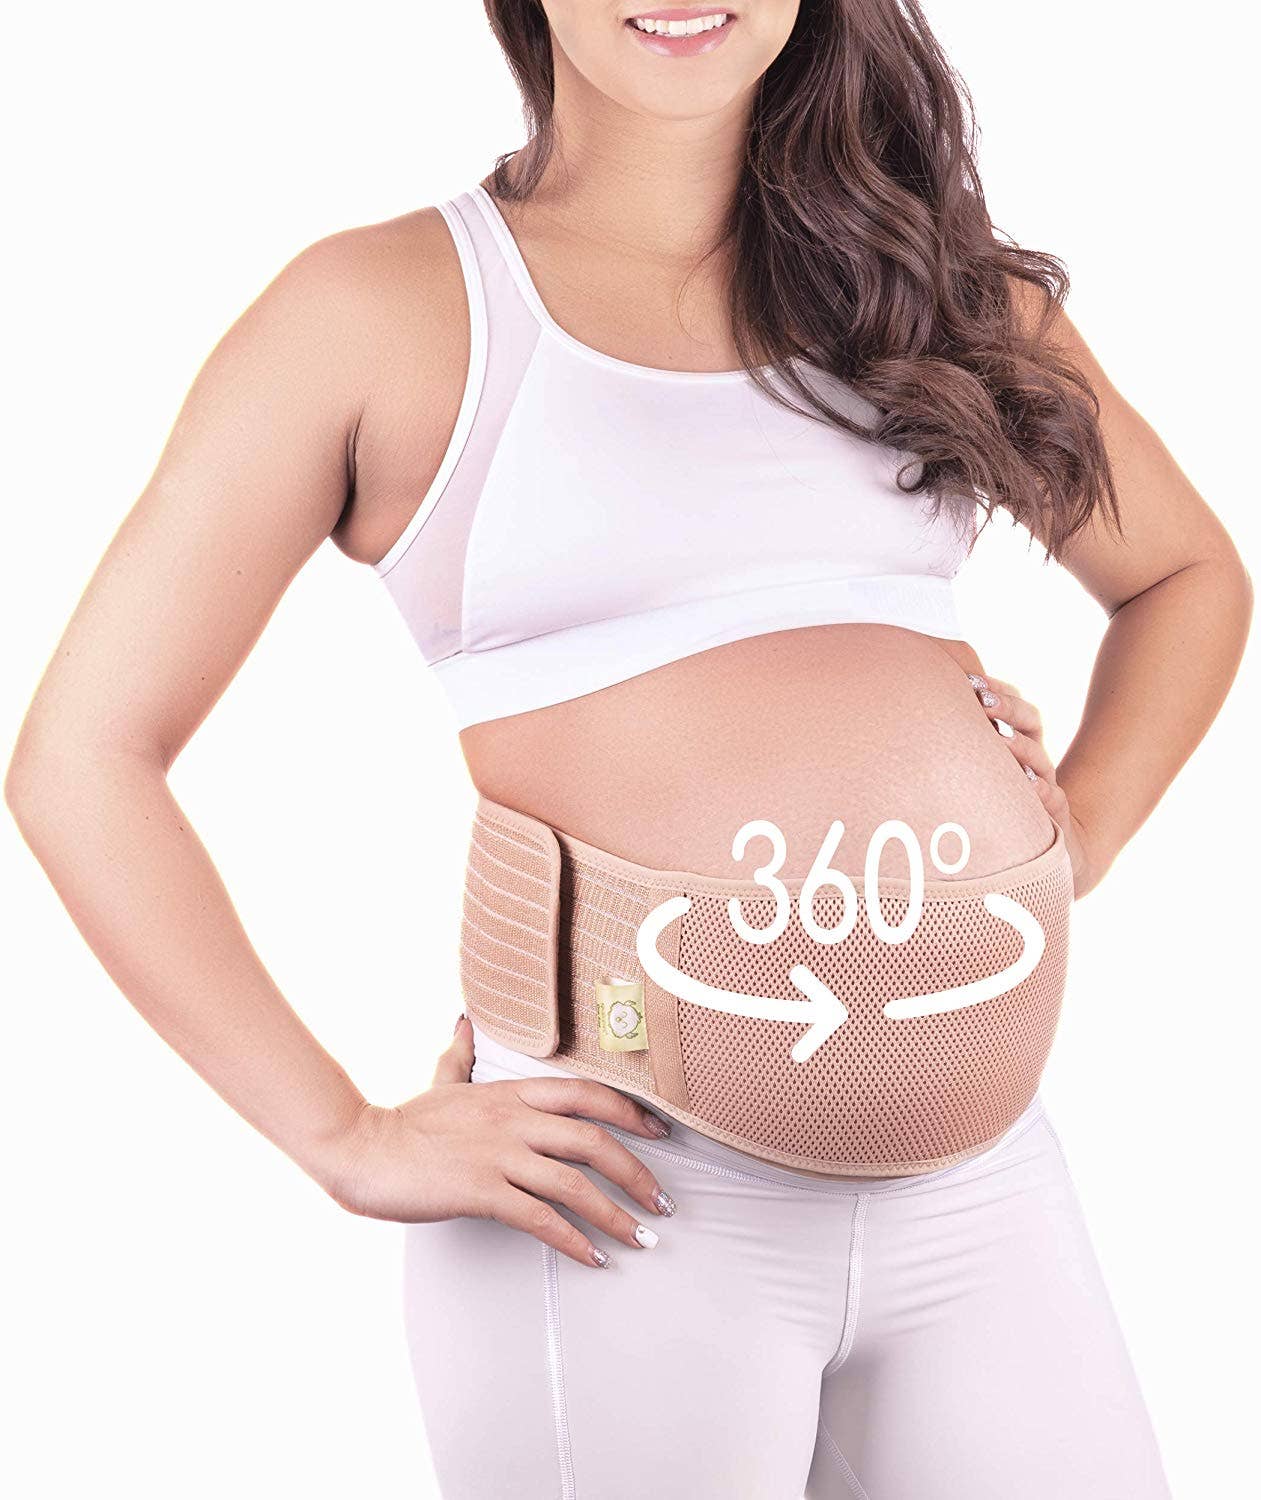 KeaBabies Maternity Belly Band for Pregnancy, Pregnancy Belly Band